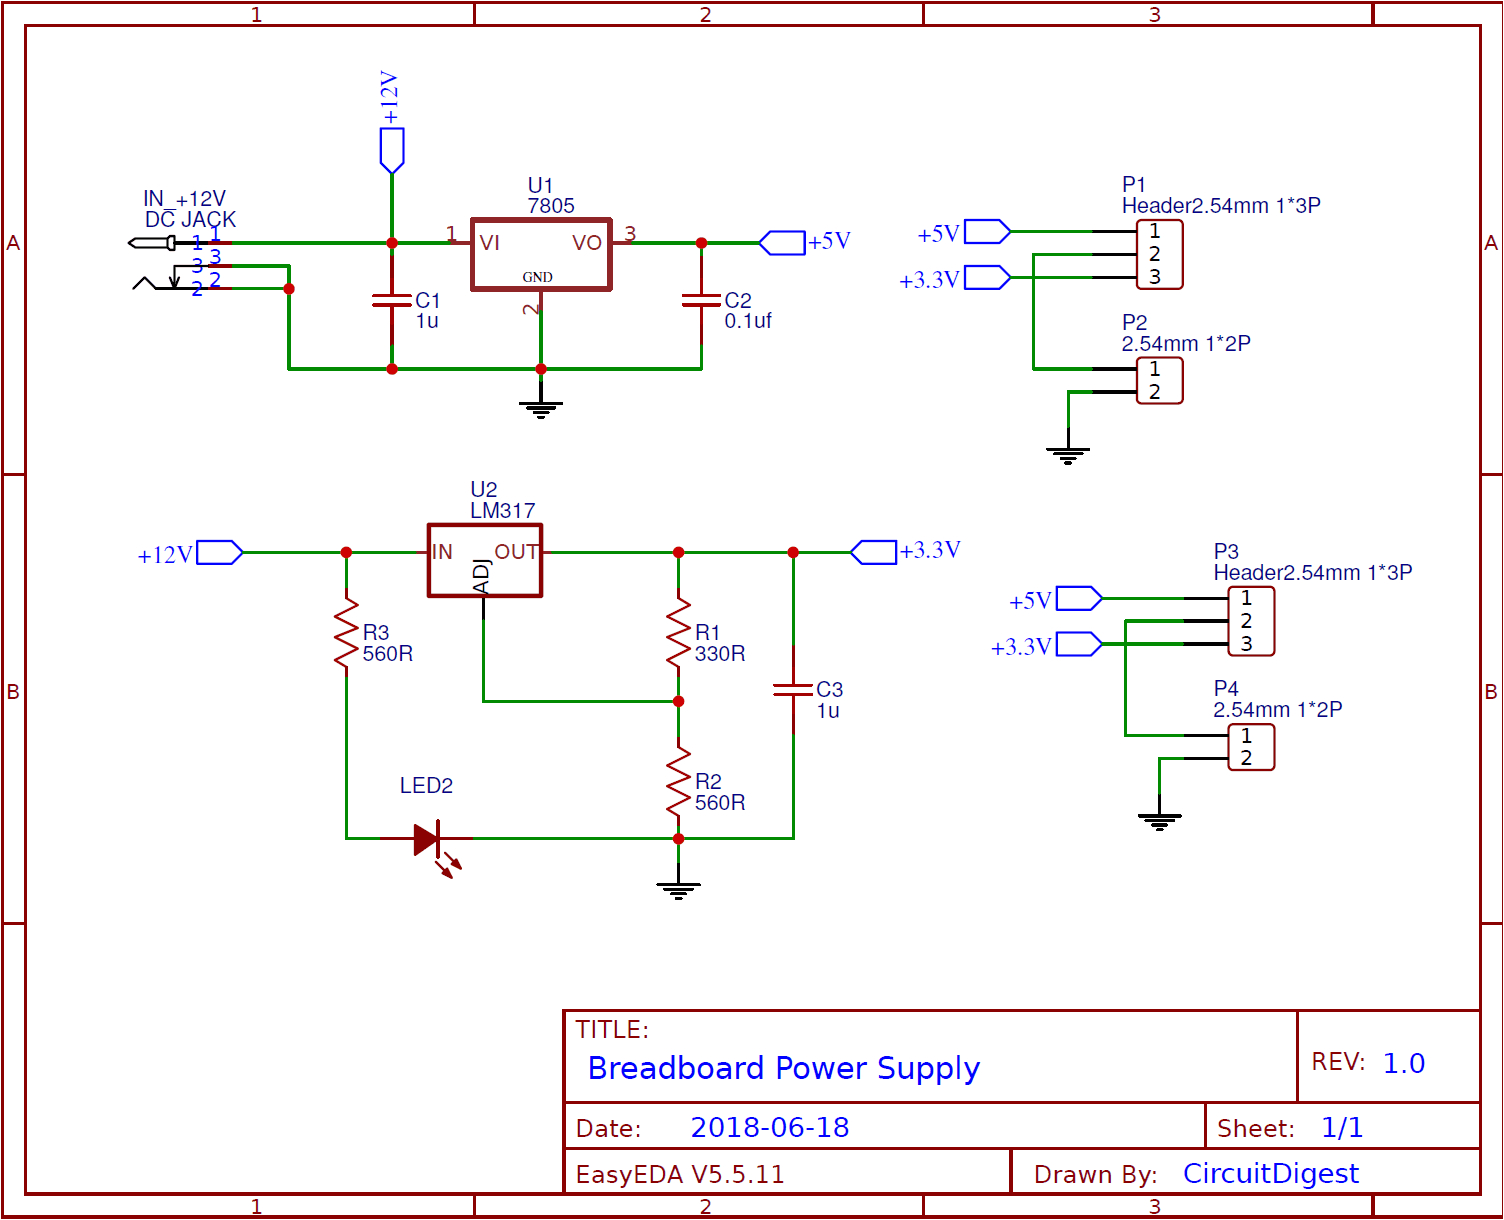 circuit diagram for diy breadboard power supply circuit on pcb png